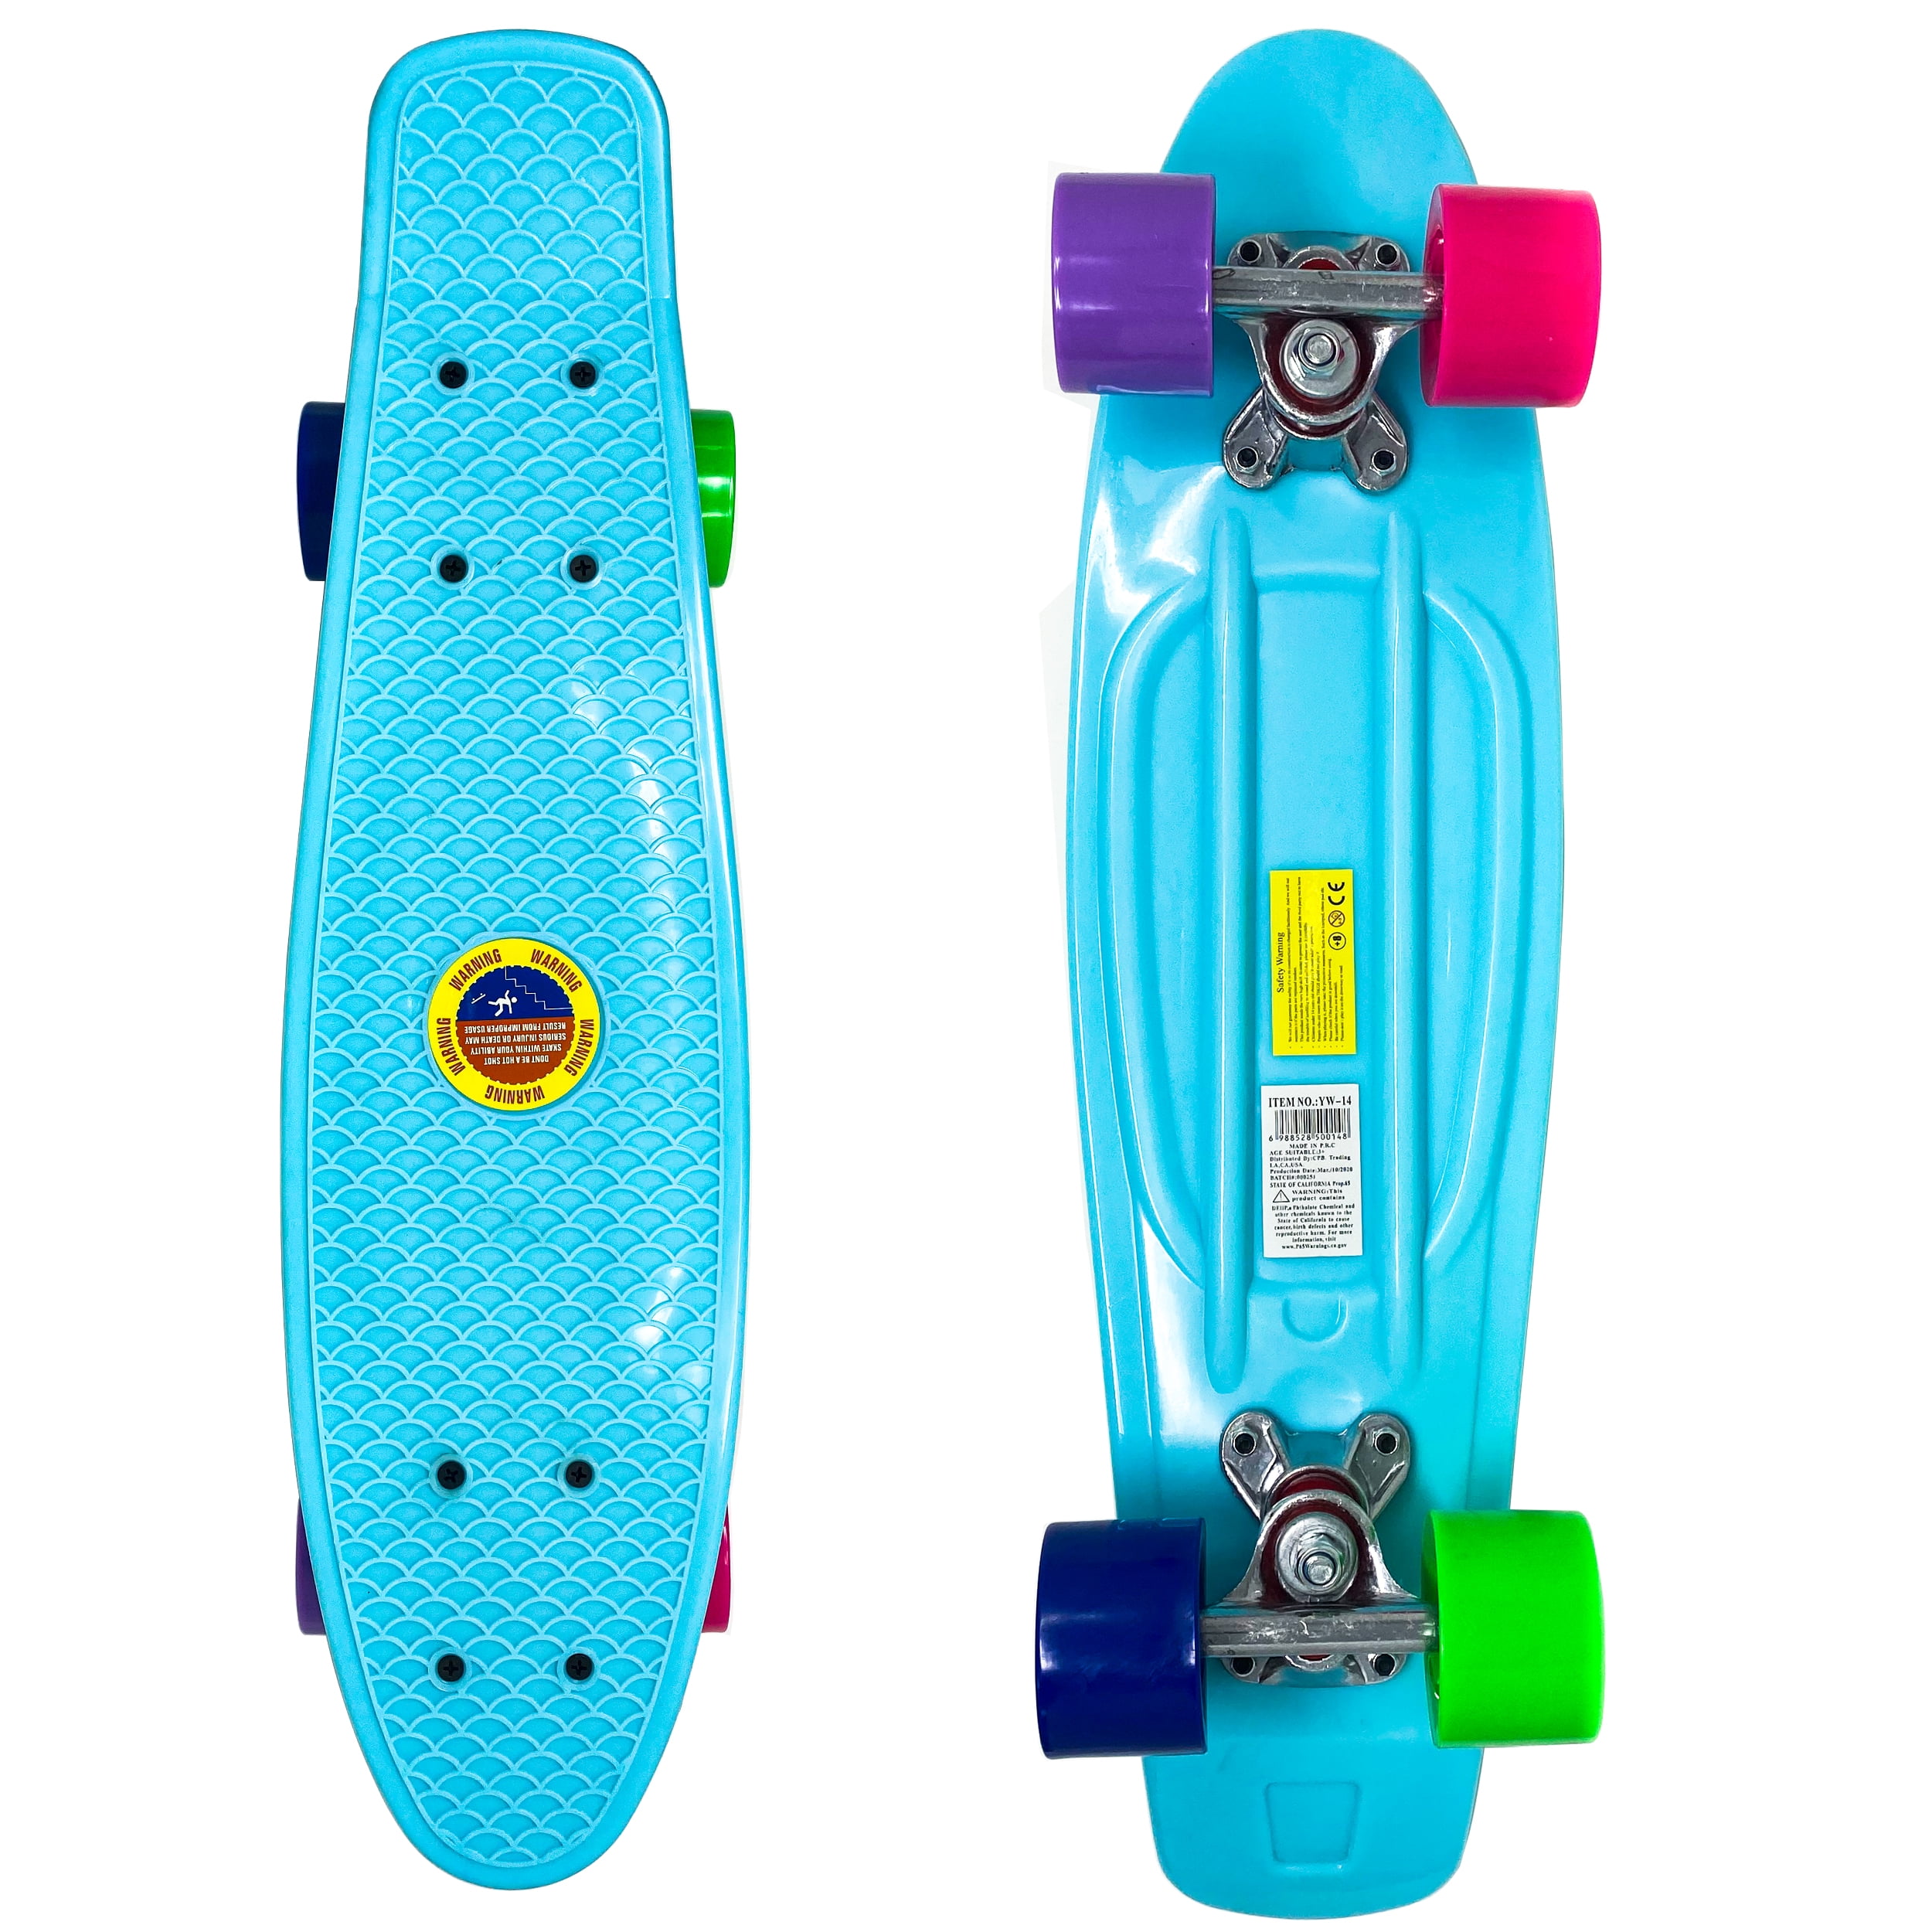 Black Retailery 22 Inch Skateboard With Light-Up LED Wheels 